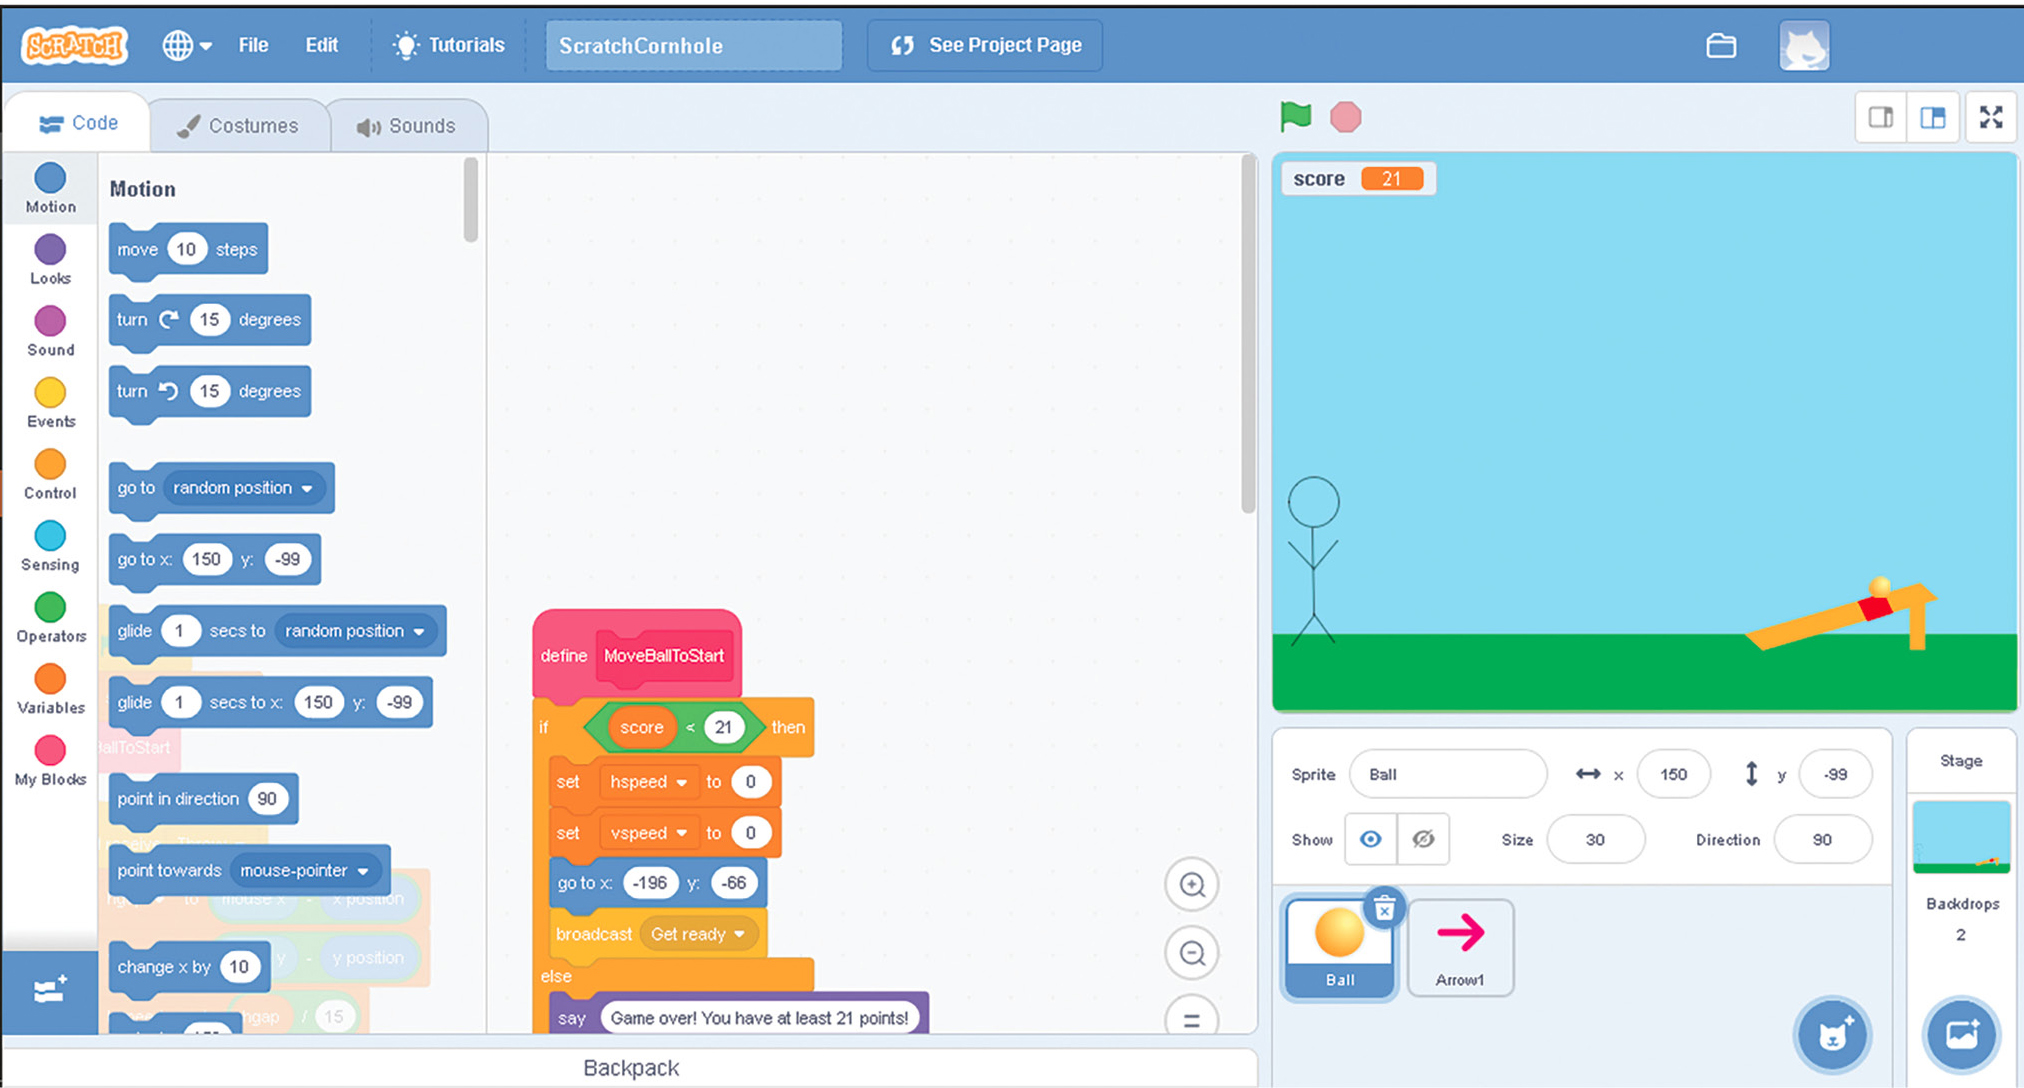 Prebuilt scratch game link available in Online Resources.